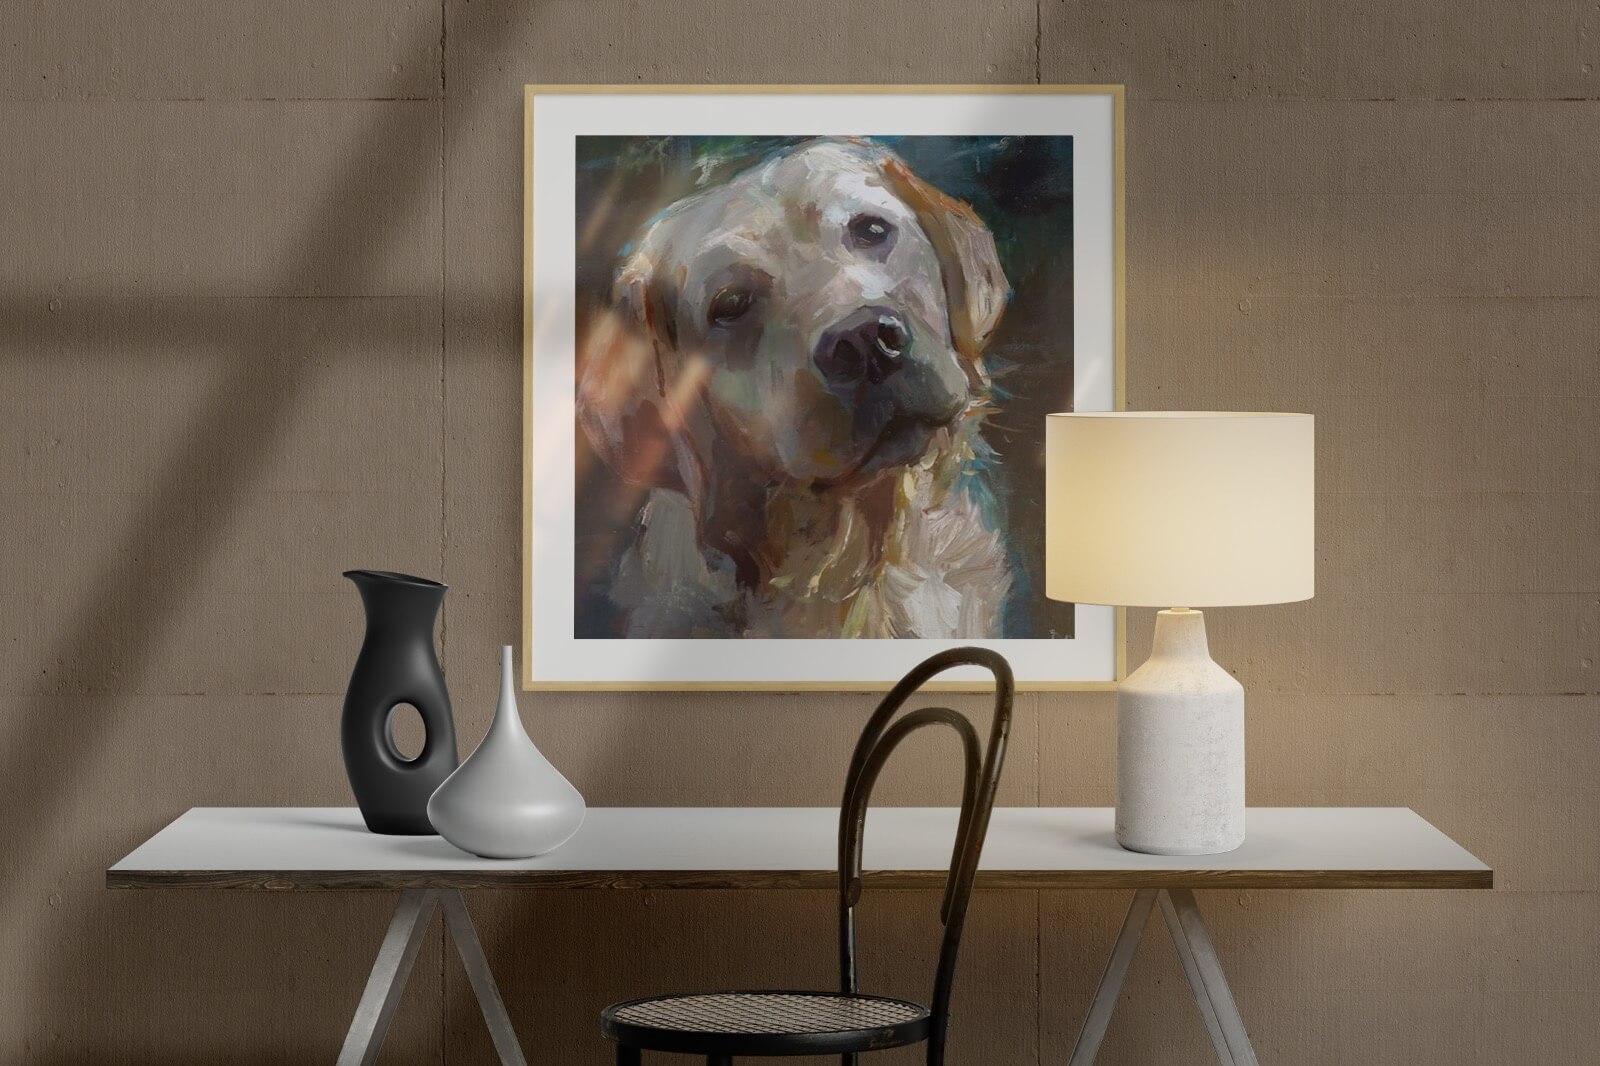 Handmade Oil Painting of a pet from a photograph